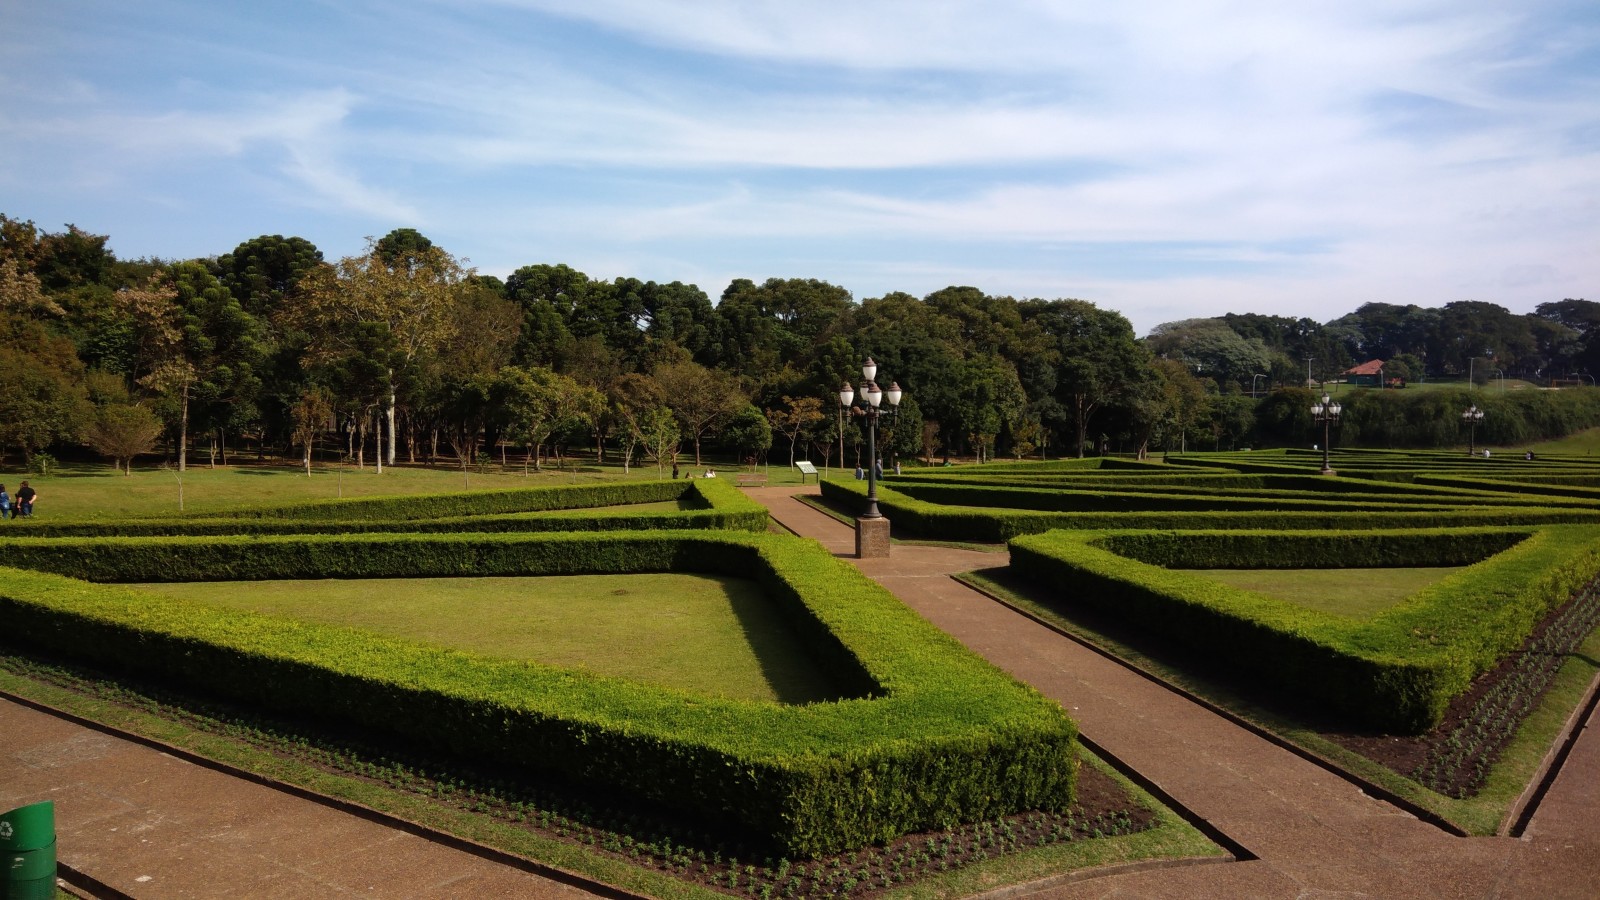 Green trimmed hedges with red brick paths at Jardim Botânico in Brazil.